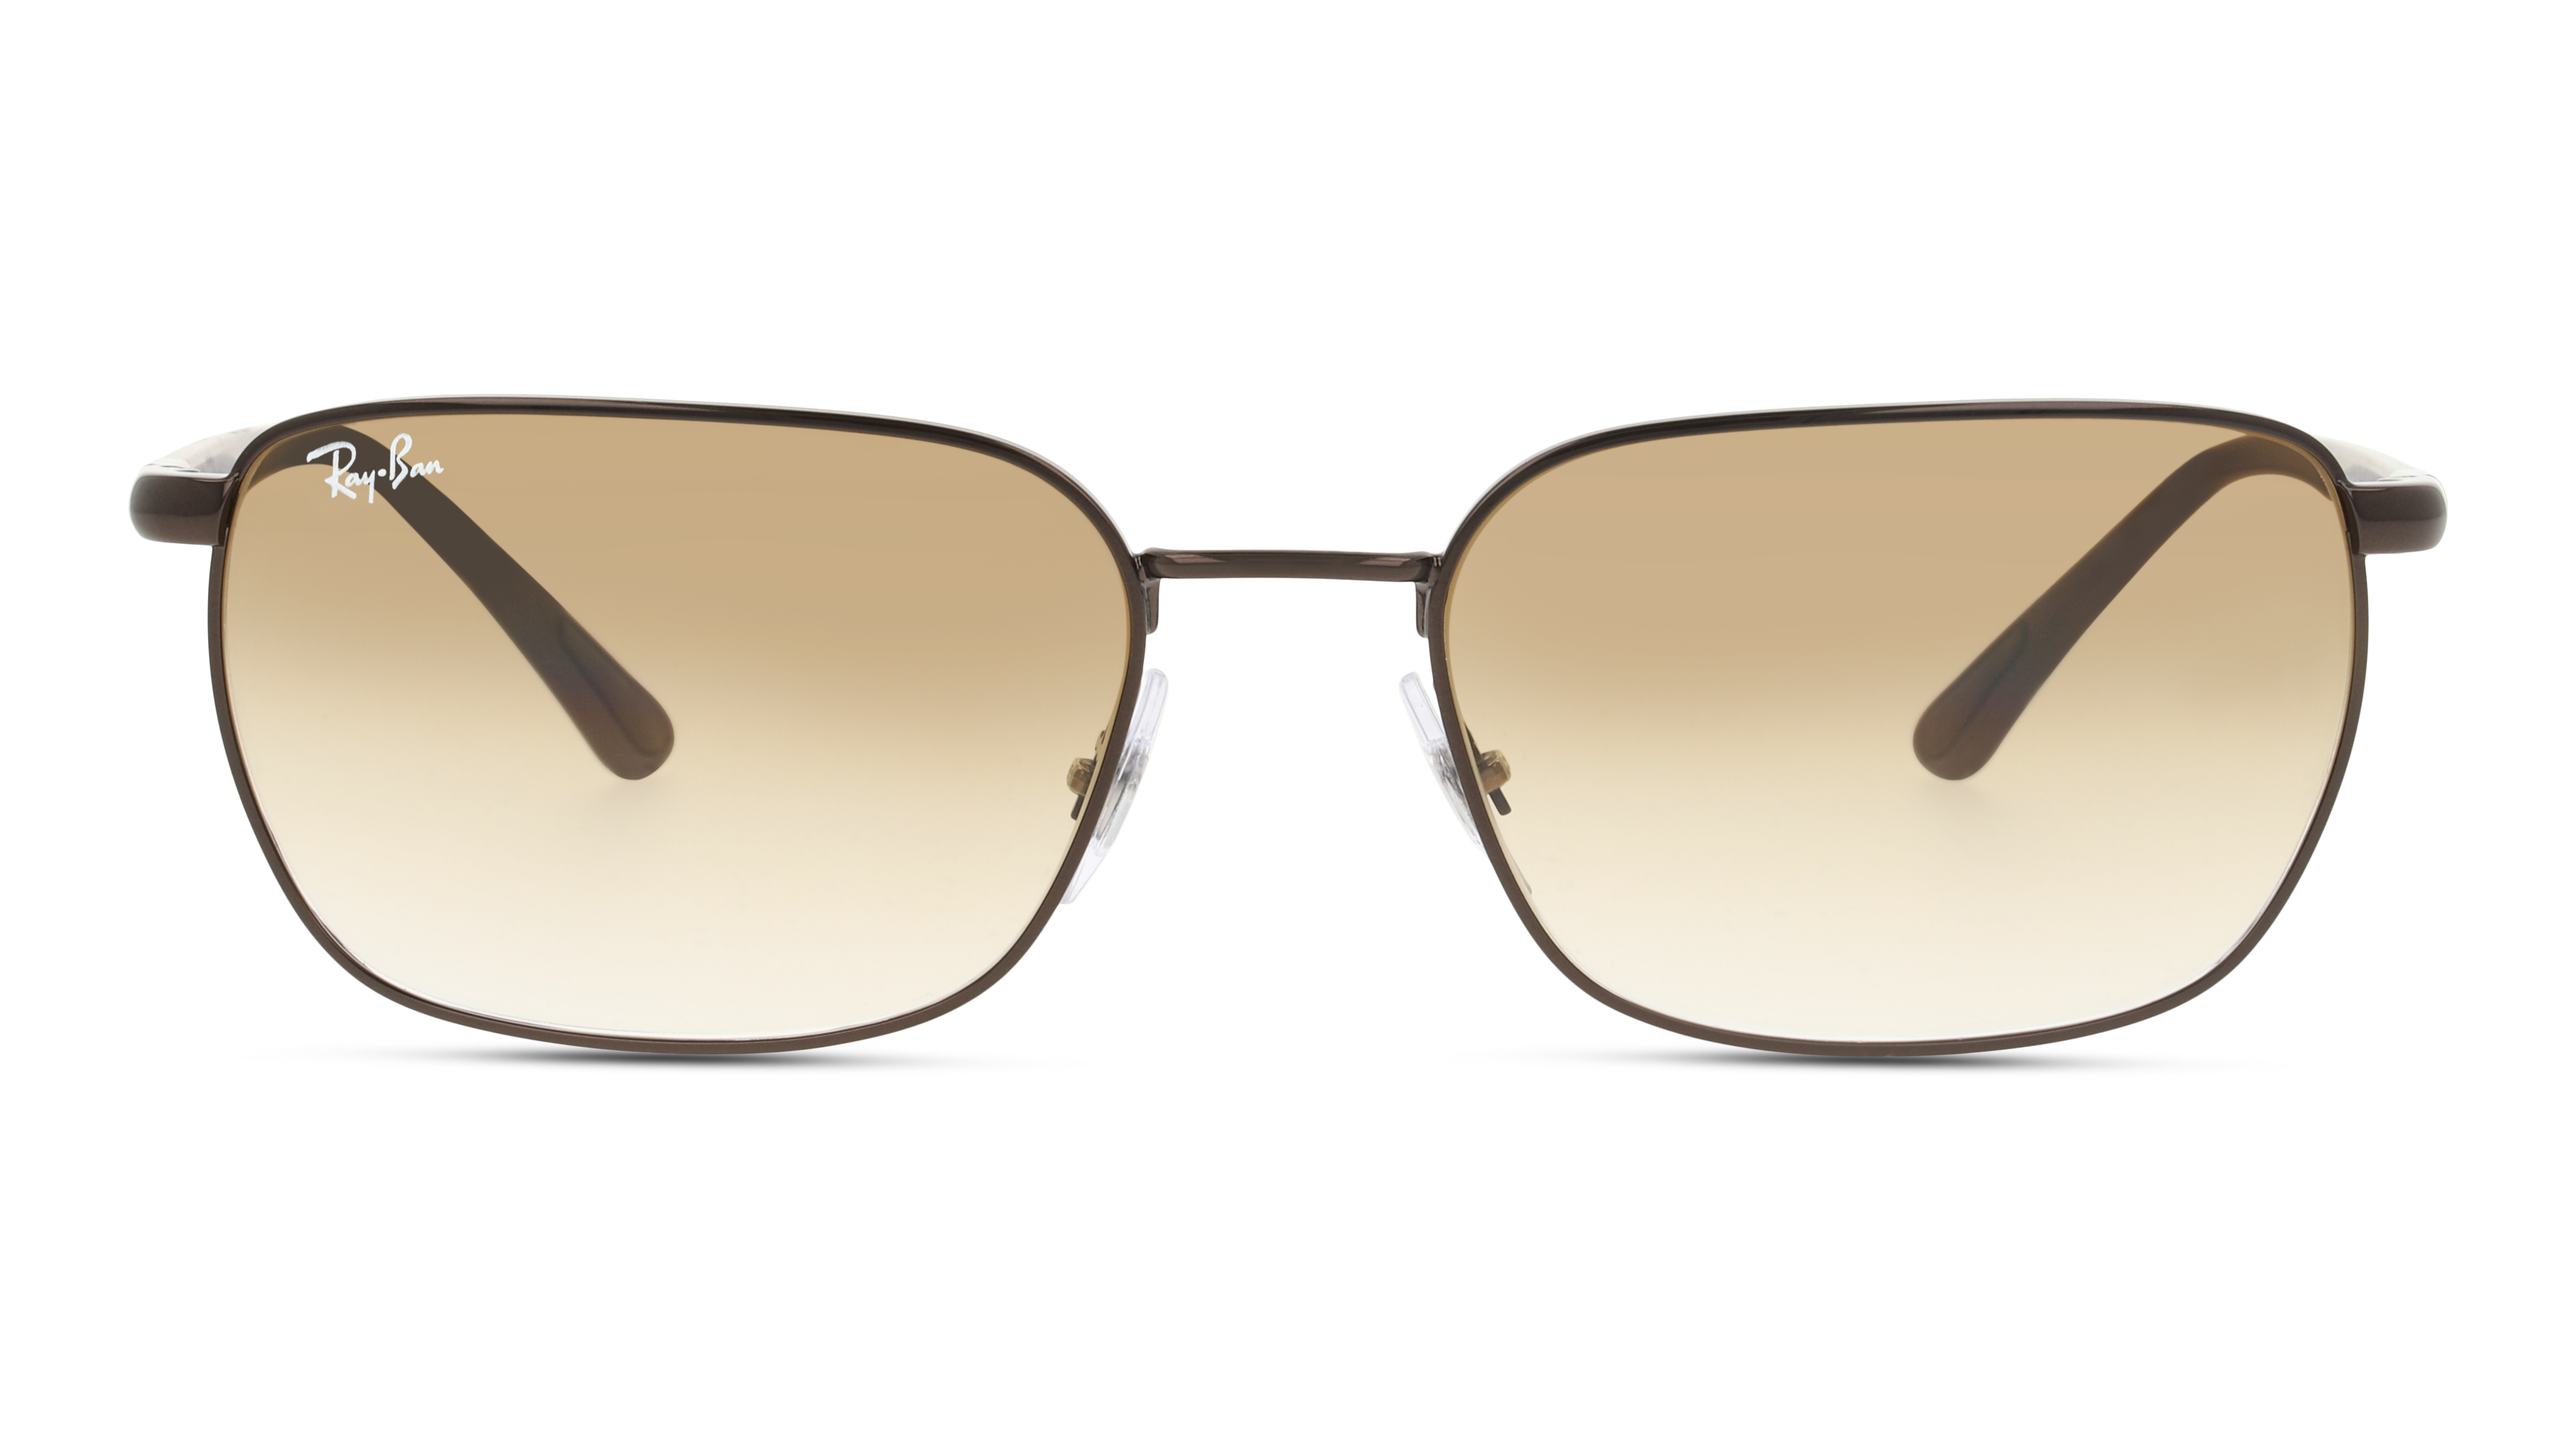 gracht linnen Ontaarden Ray-Ban RB3684 014/51 zonnebril | Pearle Opticiens